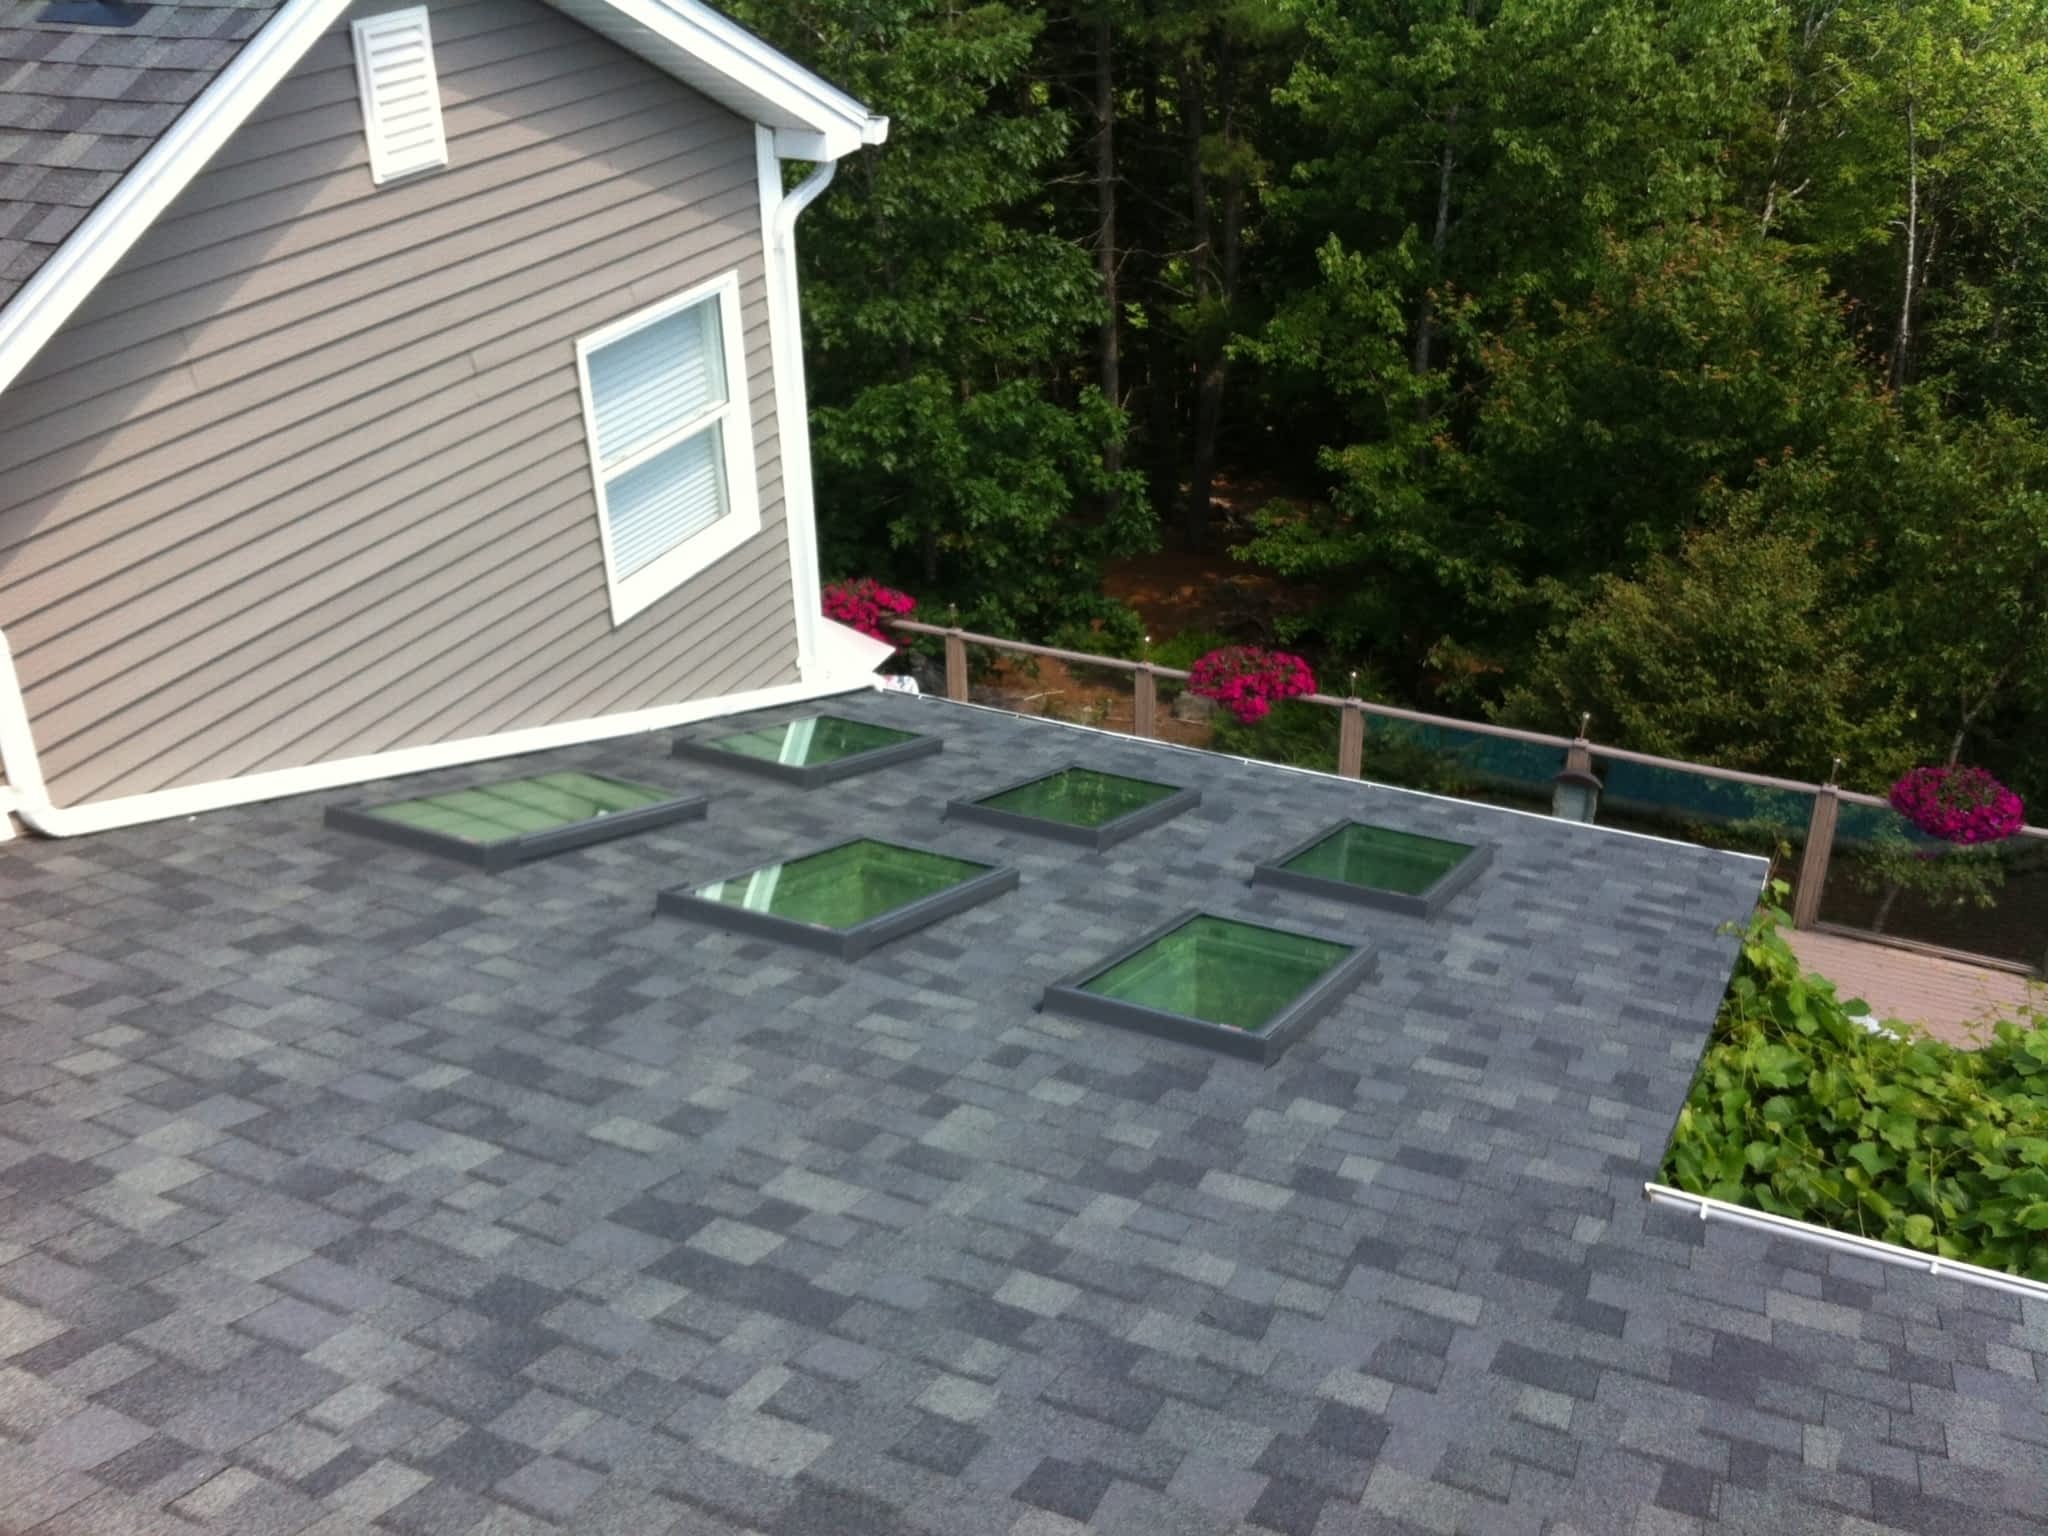 photo R & A Roofing Services